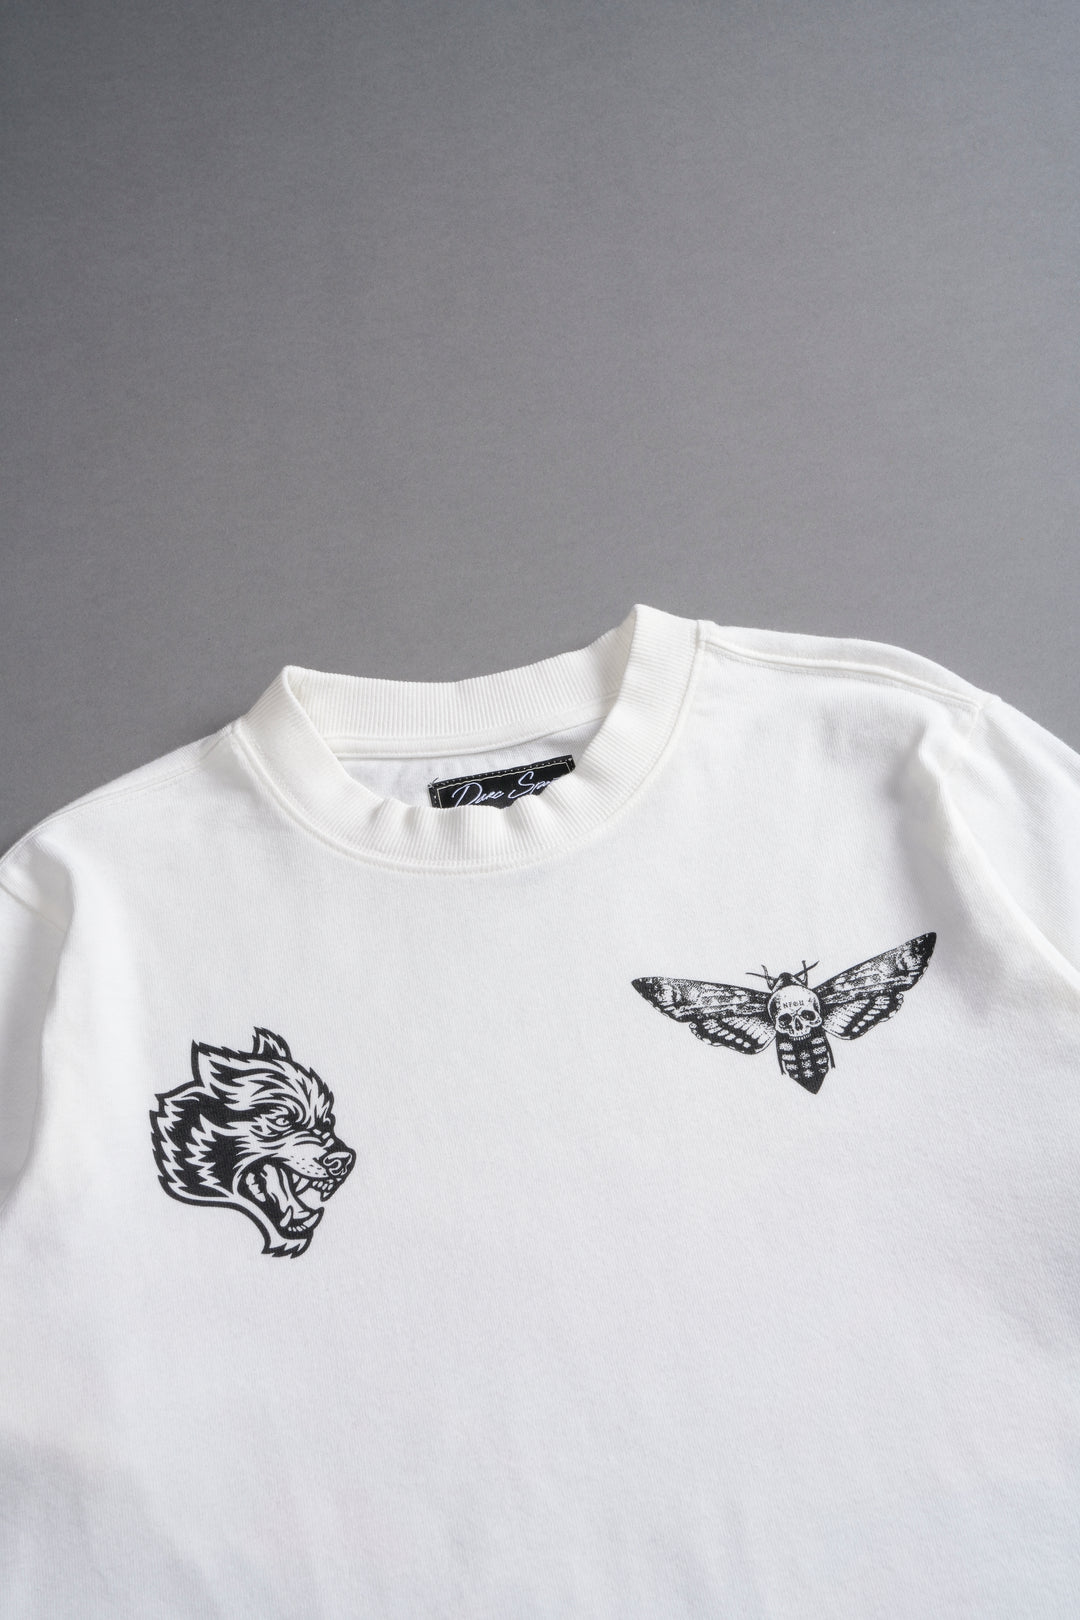 Life And Death "Premium Vintage" (Cropped) Tee in Cream